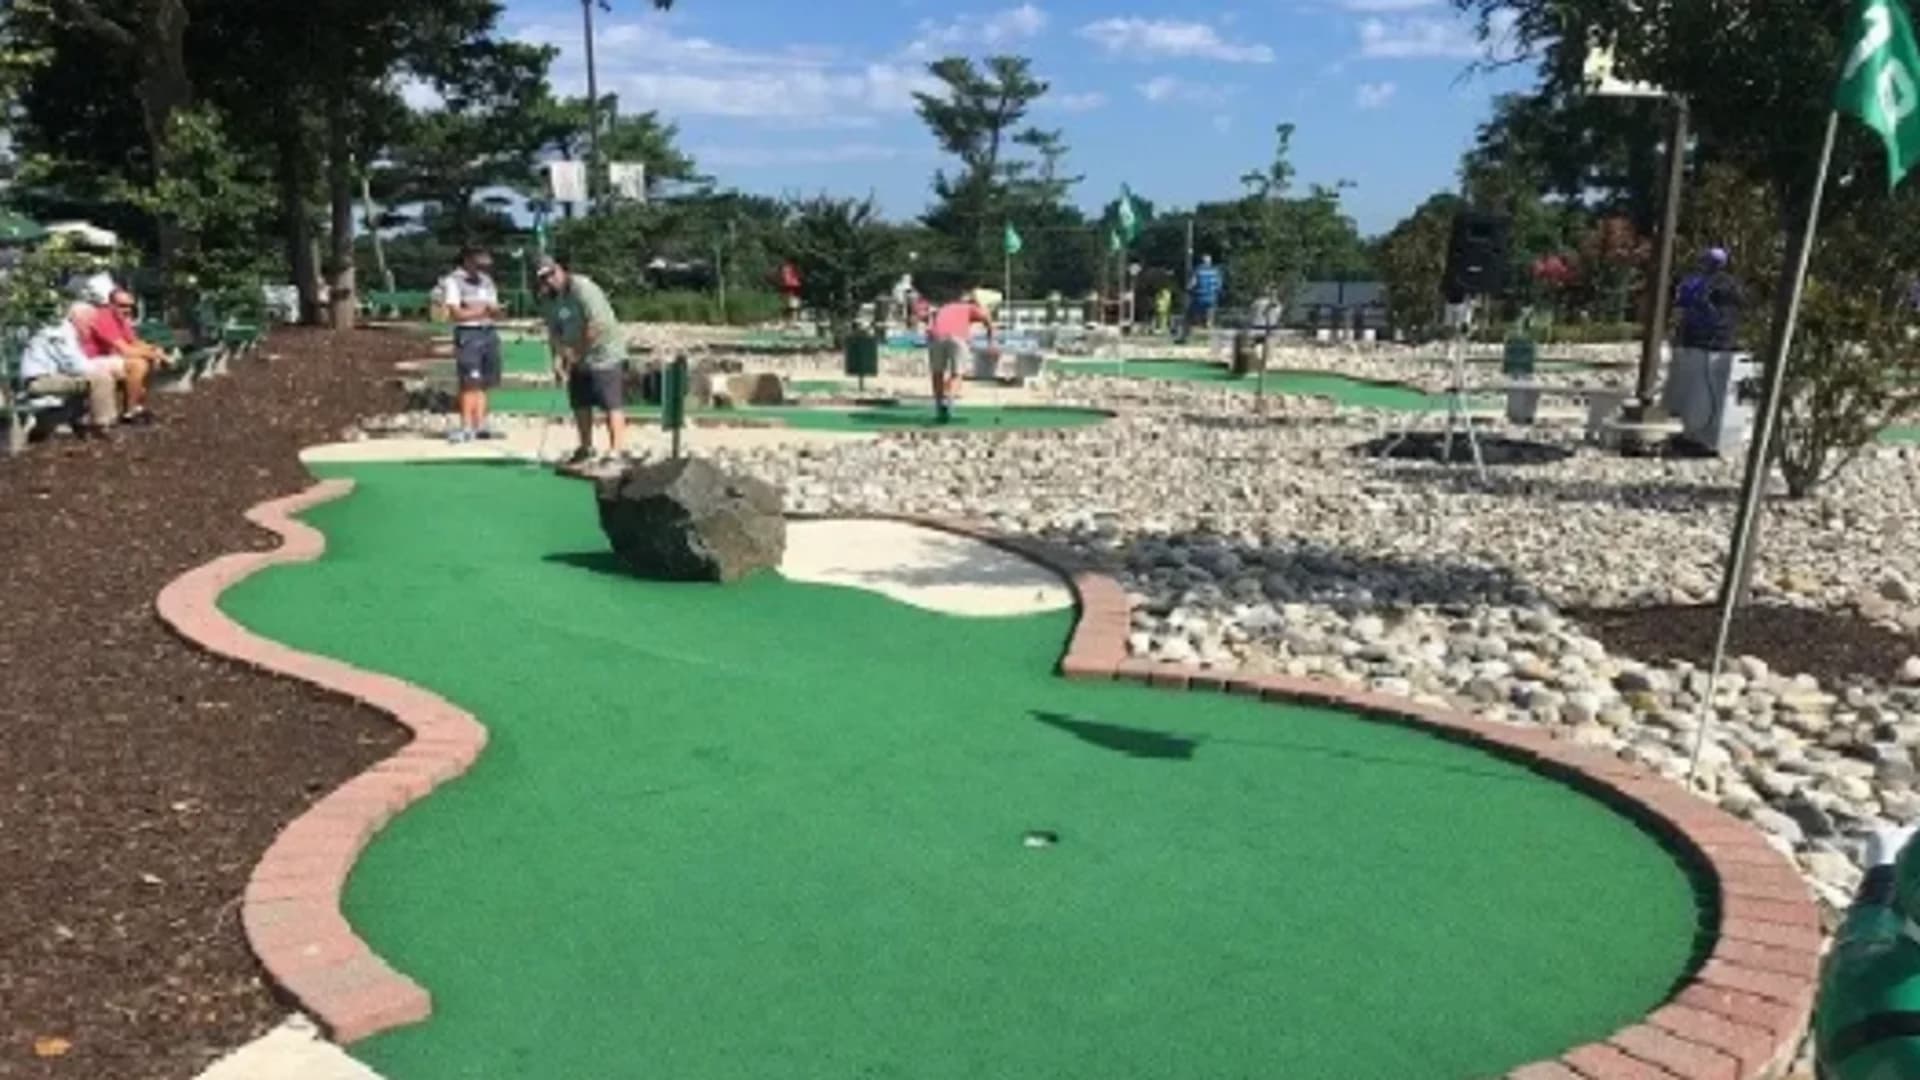 Guide: Mini-golf courses in the Hudson Valley